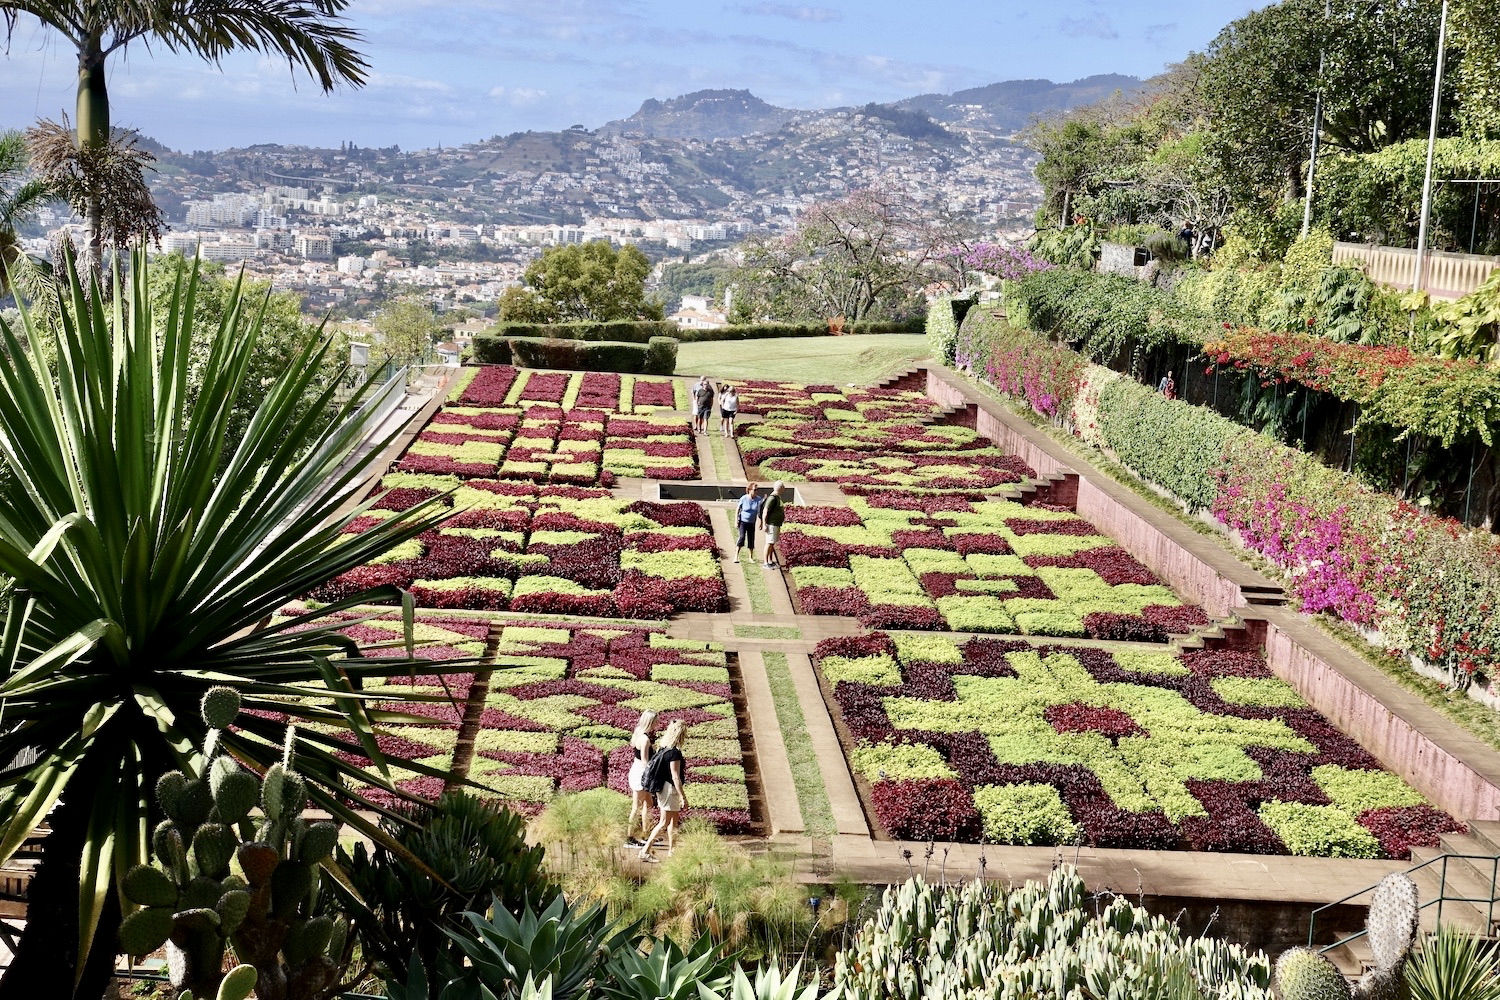 Madeira Botanical Gardens in the front, Funchal in the back